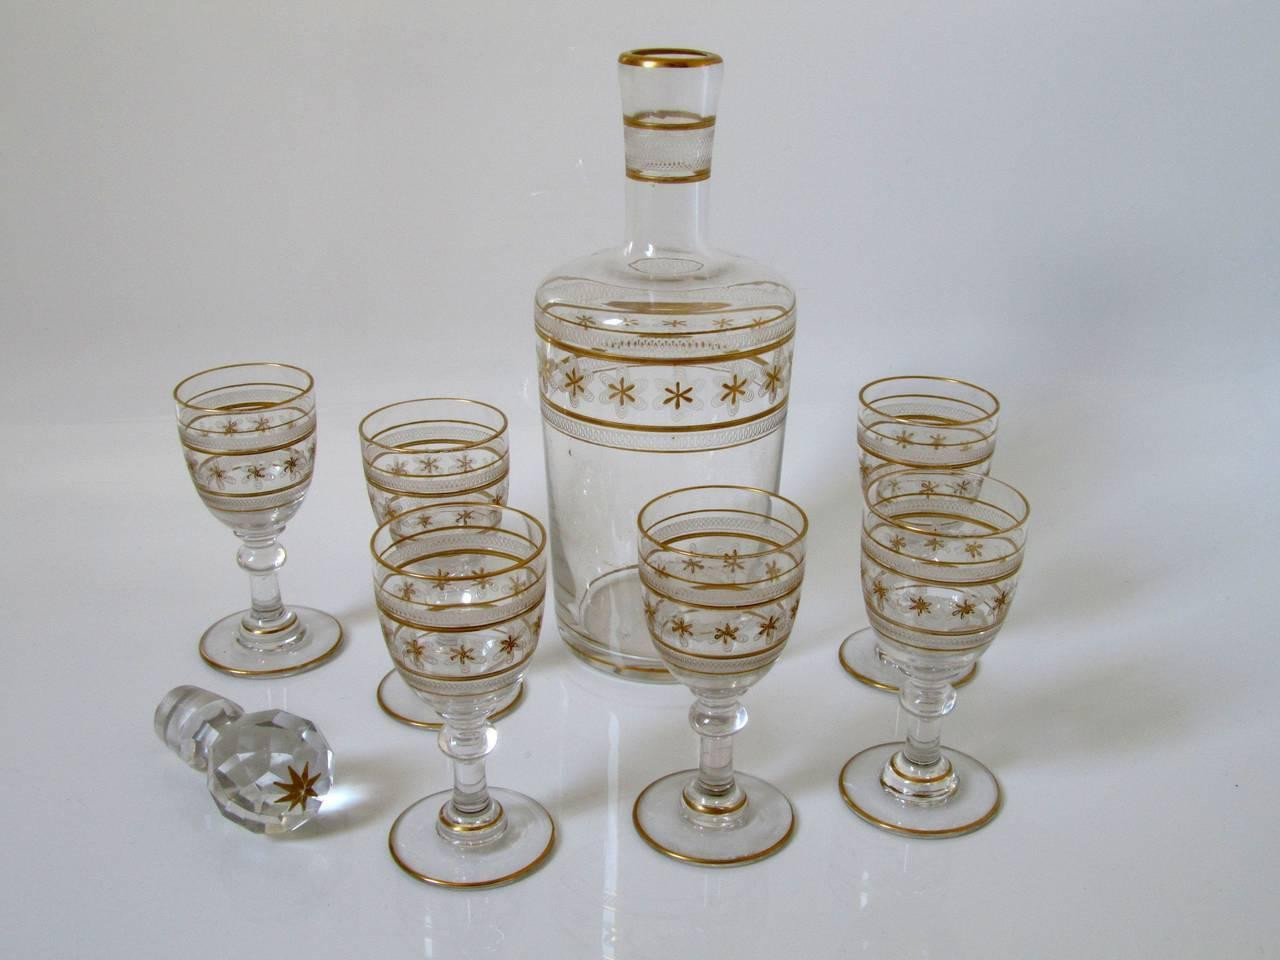 29 Cute Waterford Vase Patterns 2024 free download waterford vase patterns of saint louis antique french crystal gilded liquor or aperitif serving in saint louis antique french crystal gilded liquor or aperitif serving set at 1stdibs